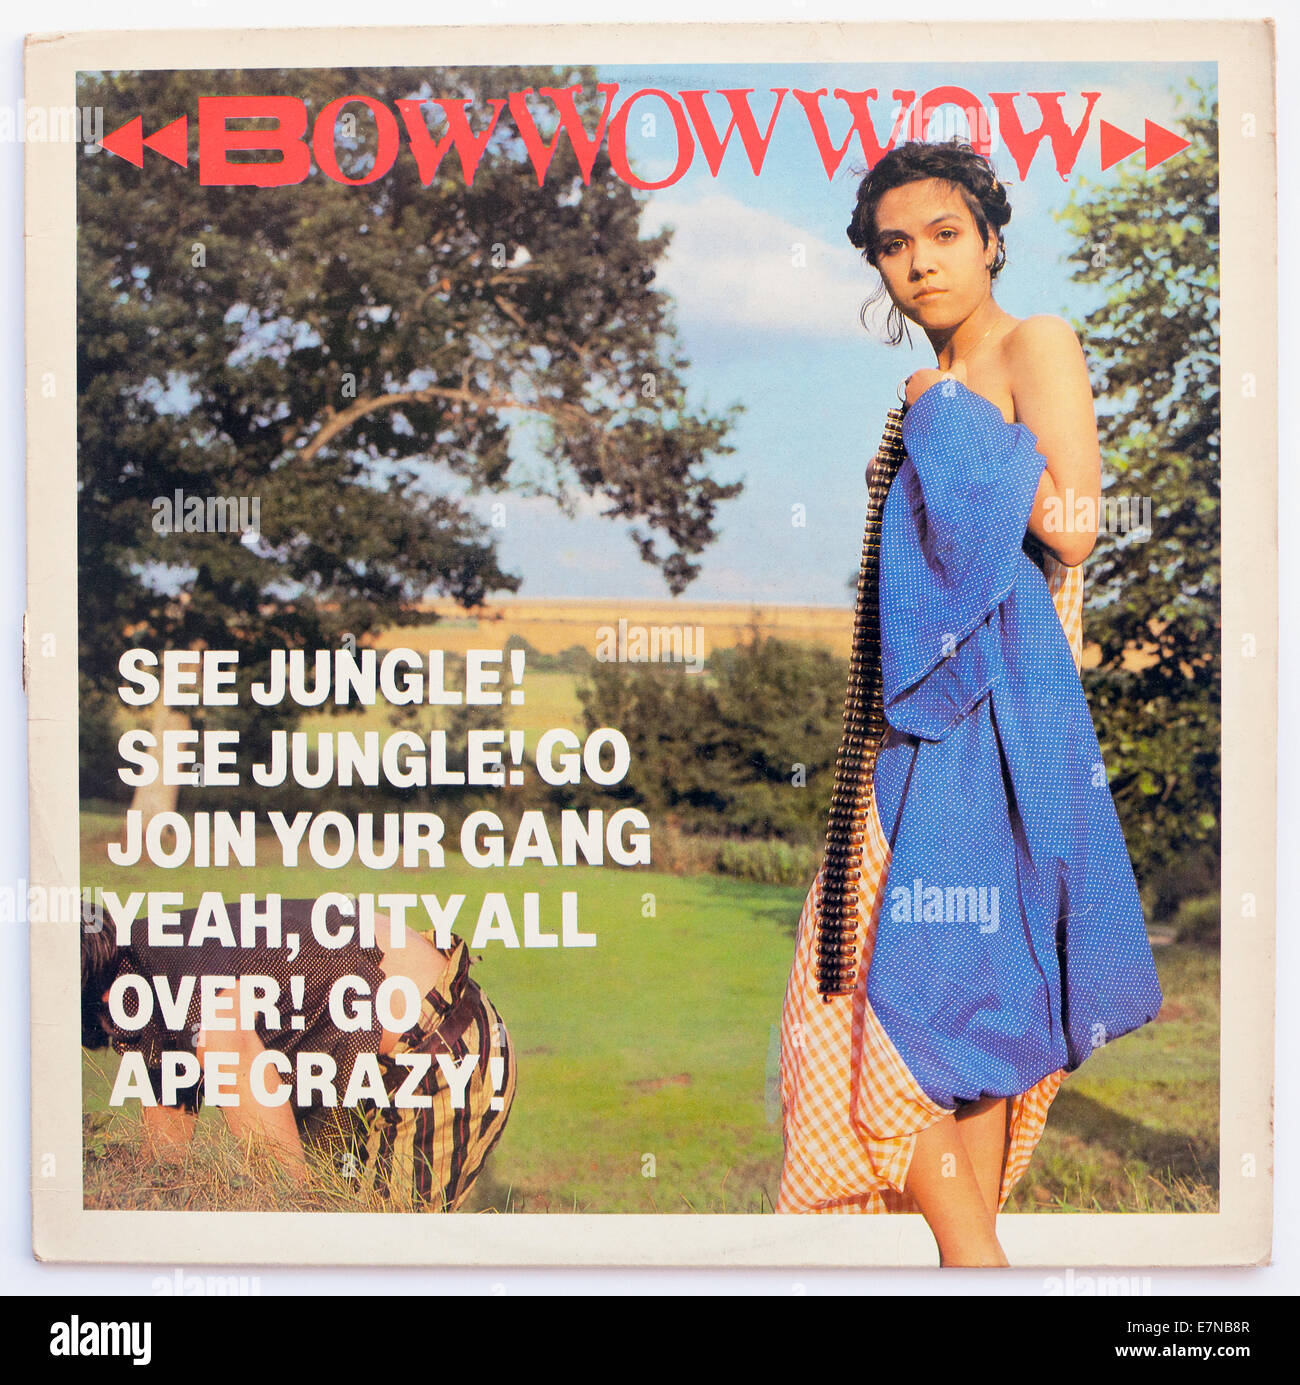 Record Review: Bow Wow Wow – “See Jungle! See Jungle! Go Join Your Gang  Yeah, City All Over Go Ape Crazy!” UK CD [part 2]